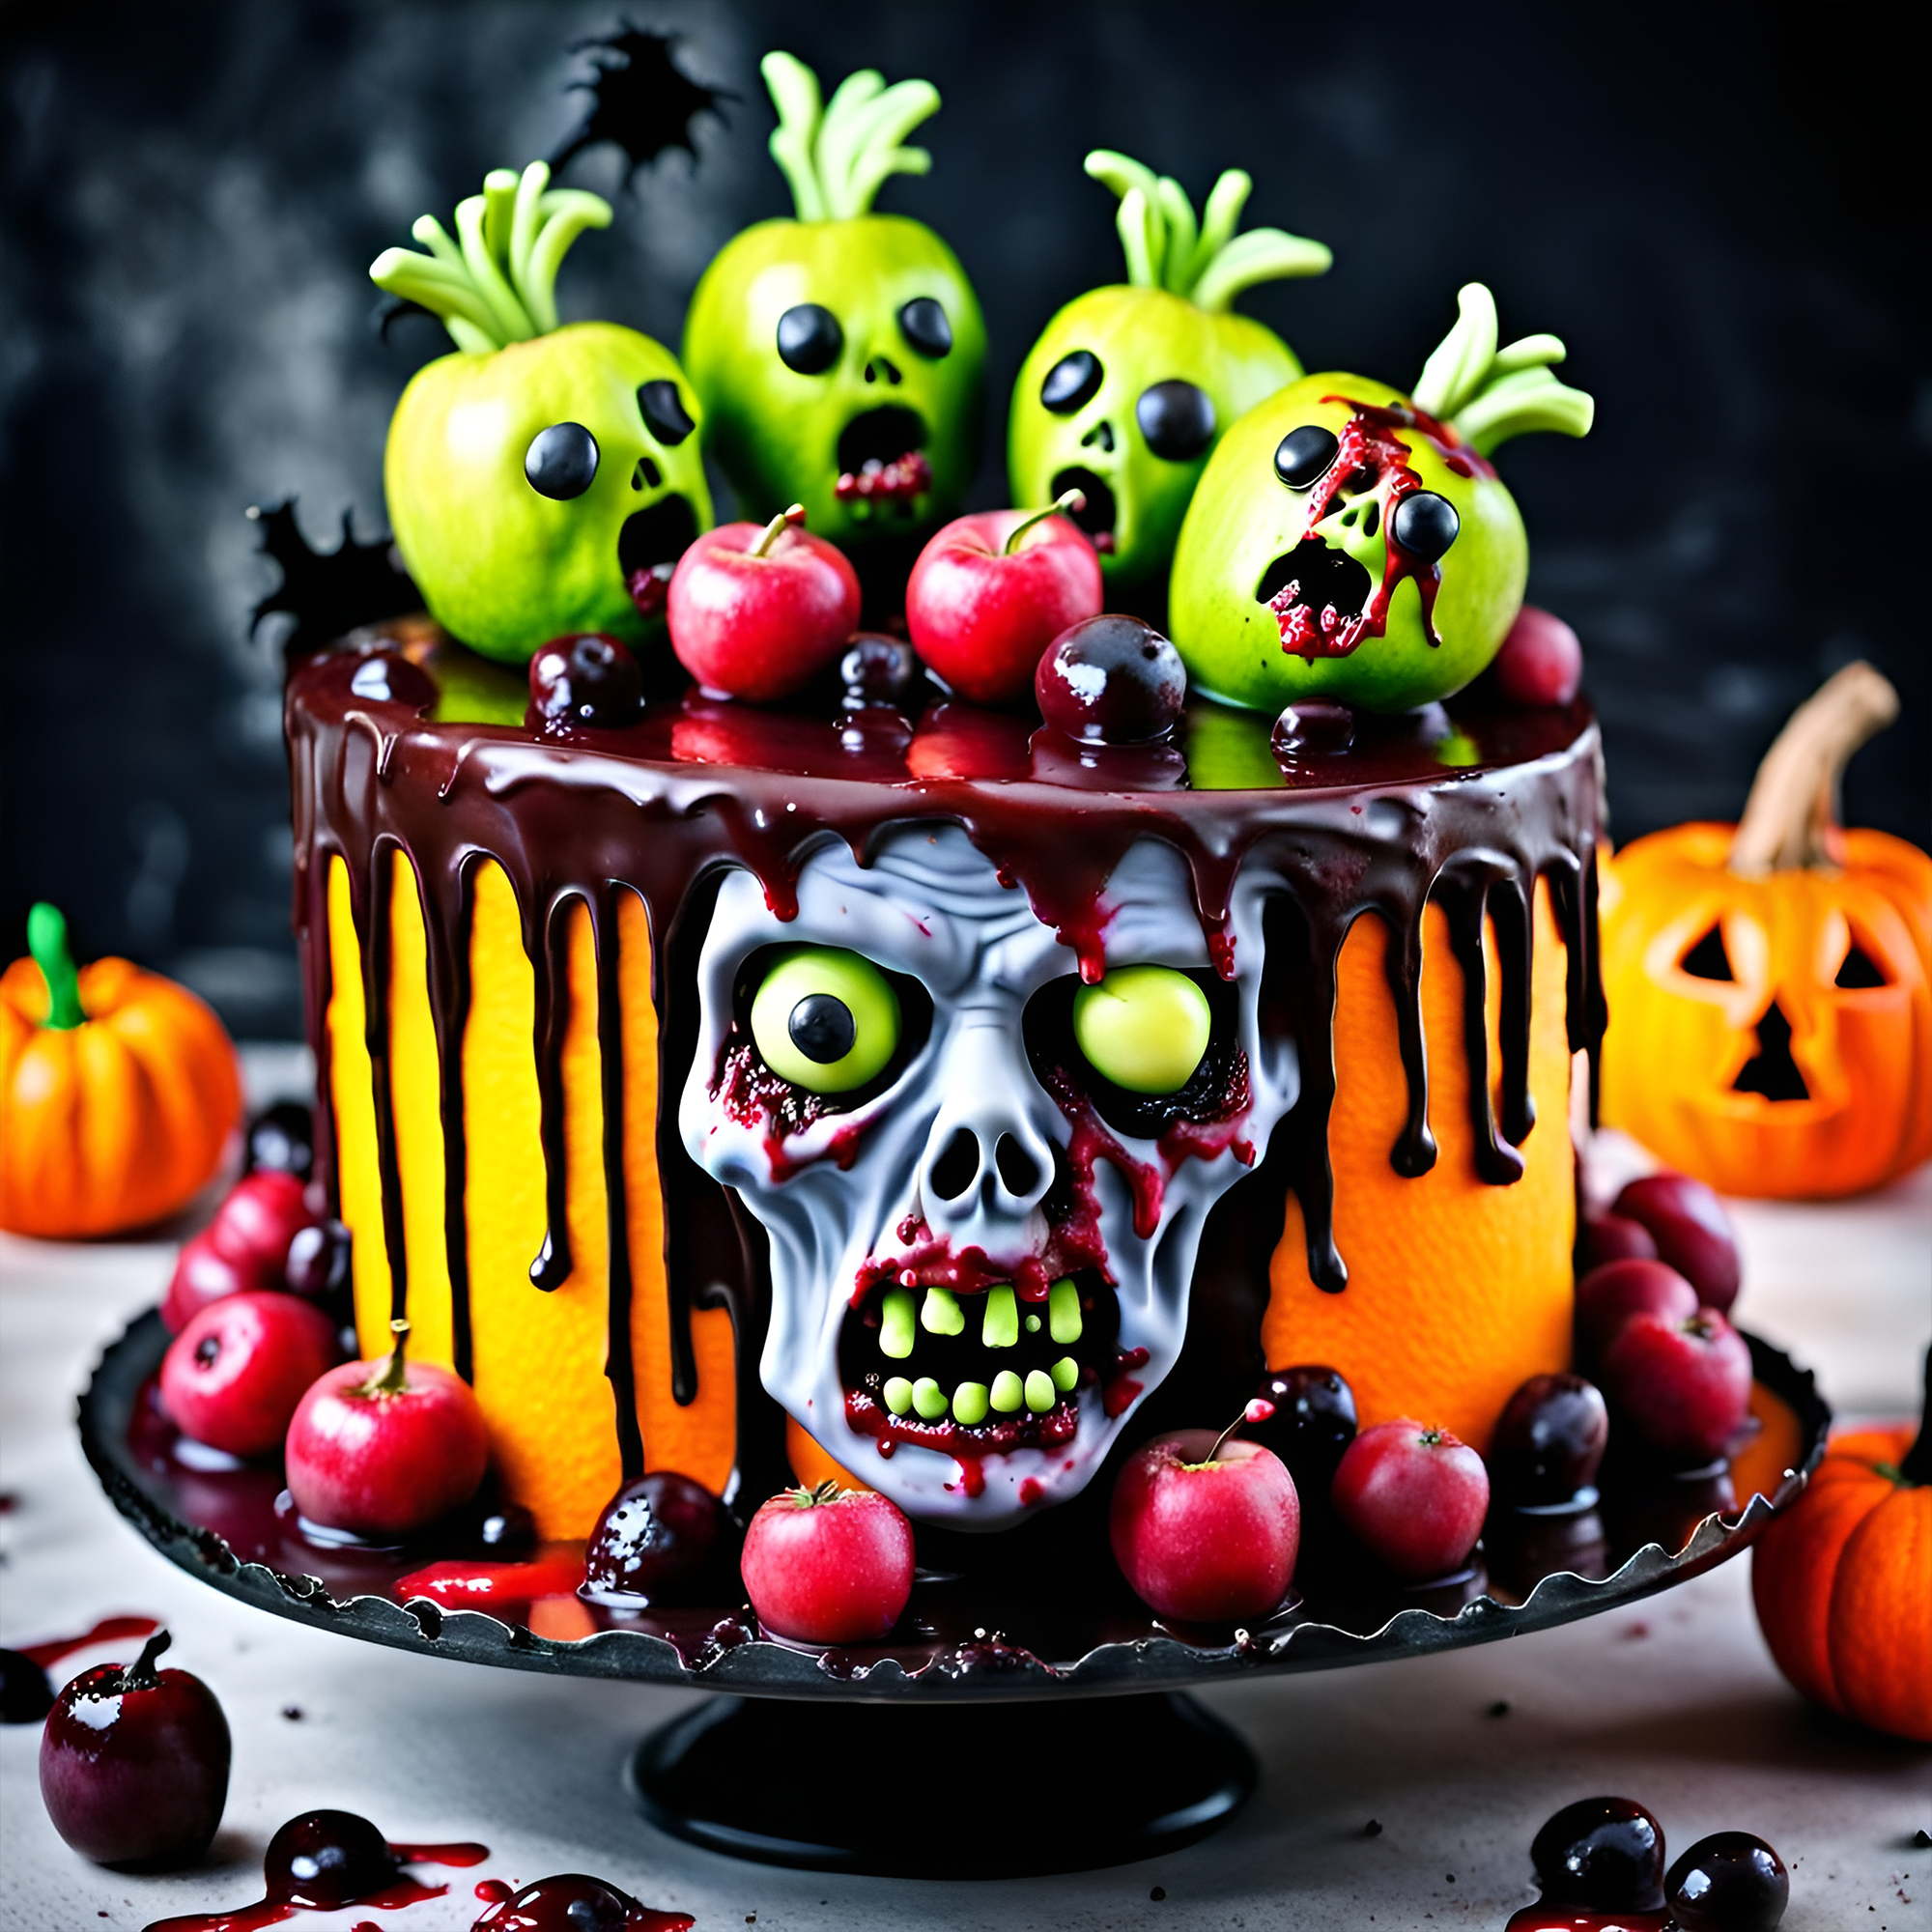 The Undead Cake